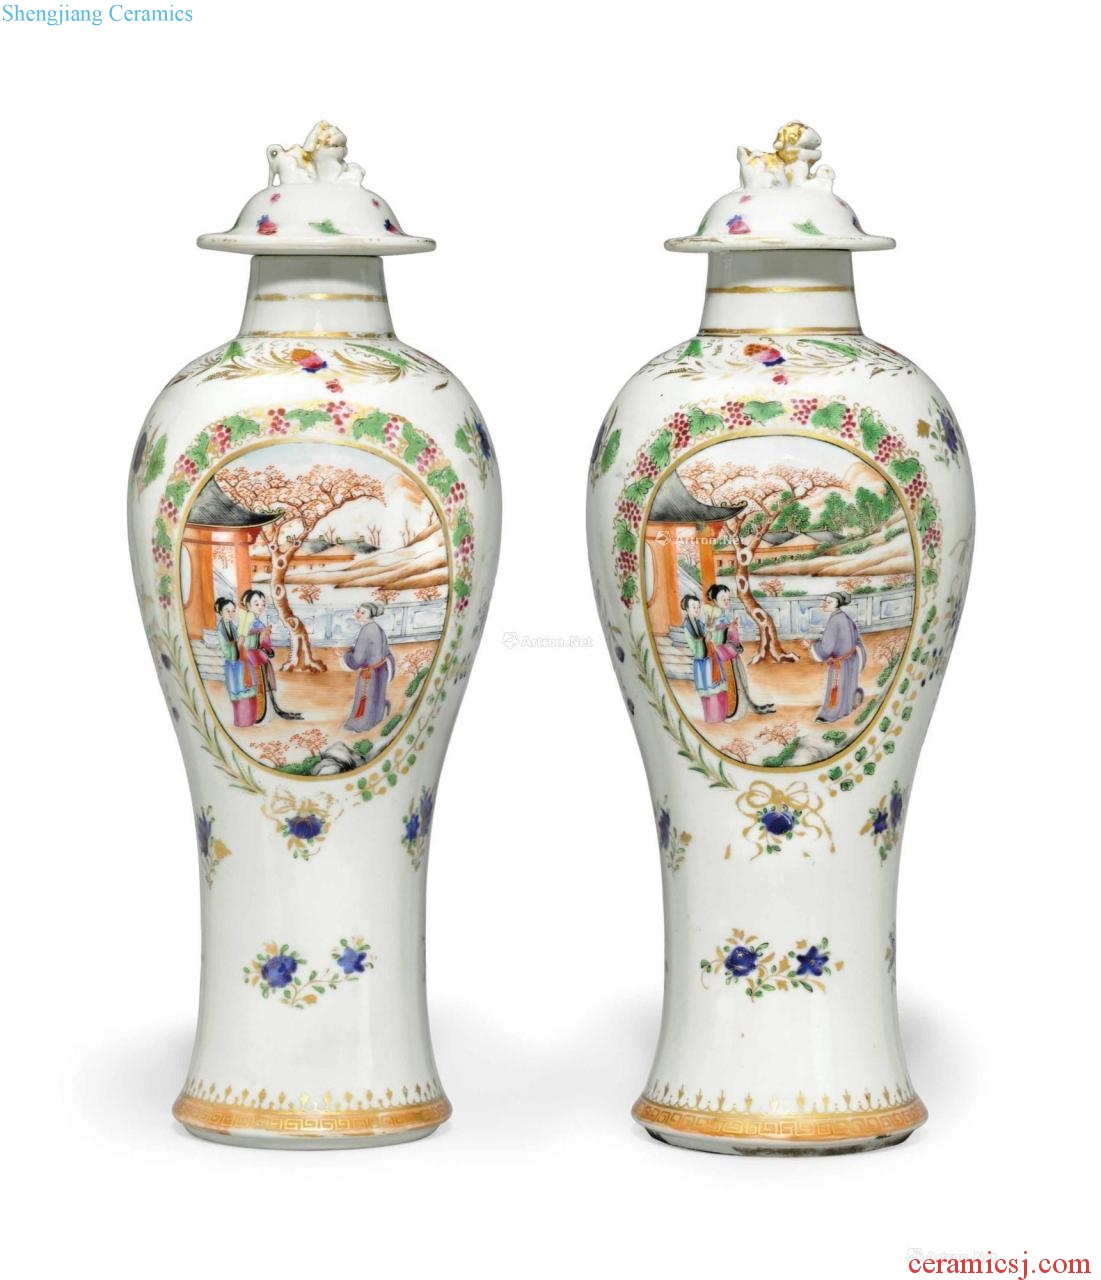 Jiaqing period, about 1800 A PAIR OF FAMILLE ROSE BALUSTER VASES AND COVERS